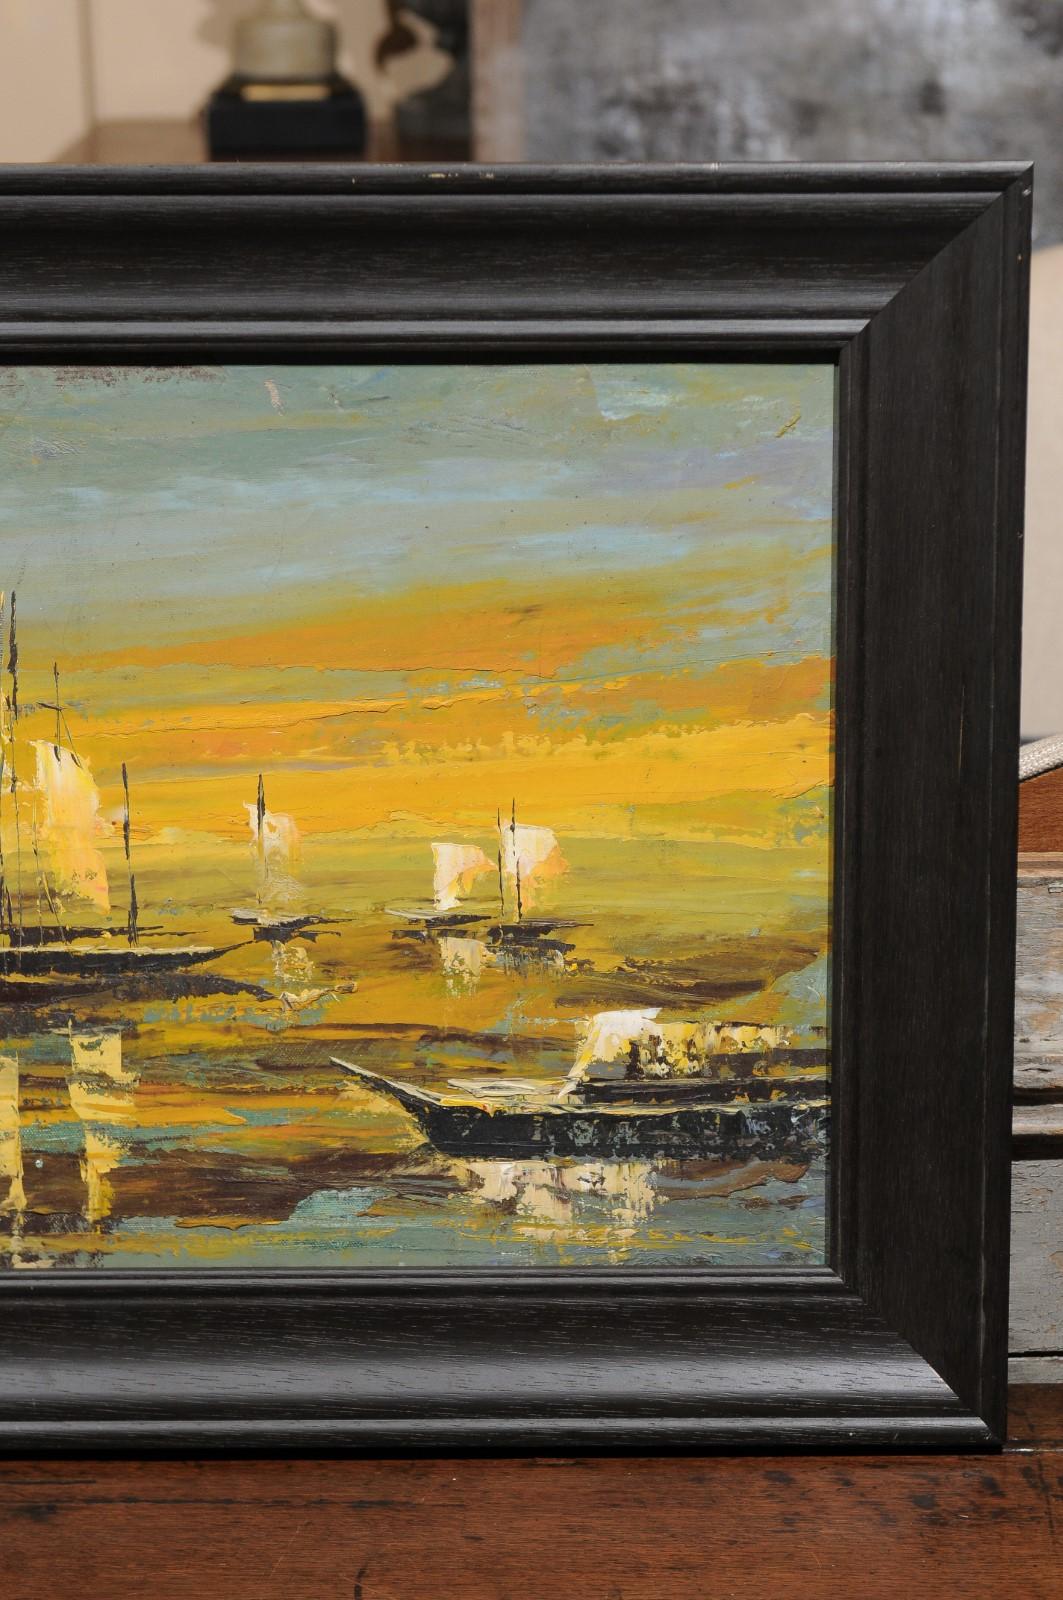 Framed 20th Century Oil on Canvas Seascape Painting with Sailboats For Sale 2